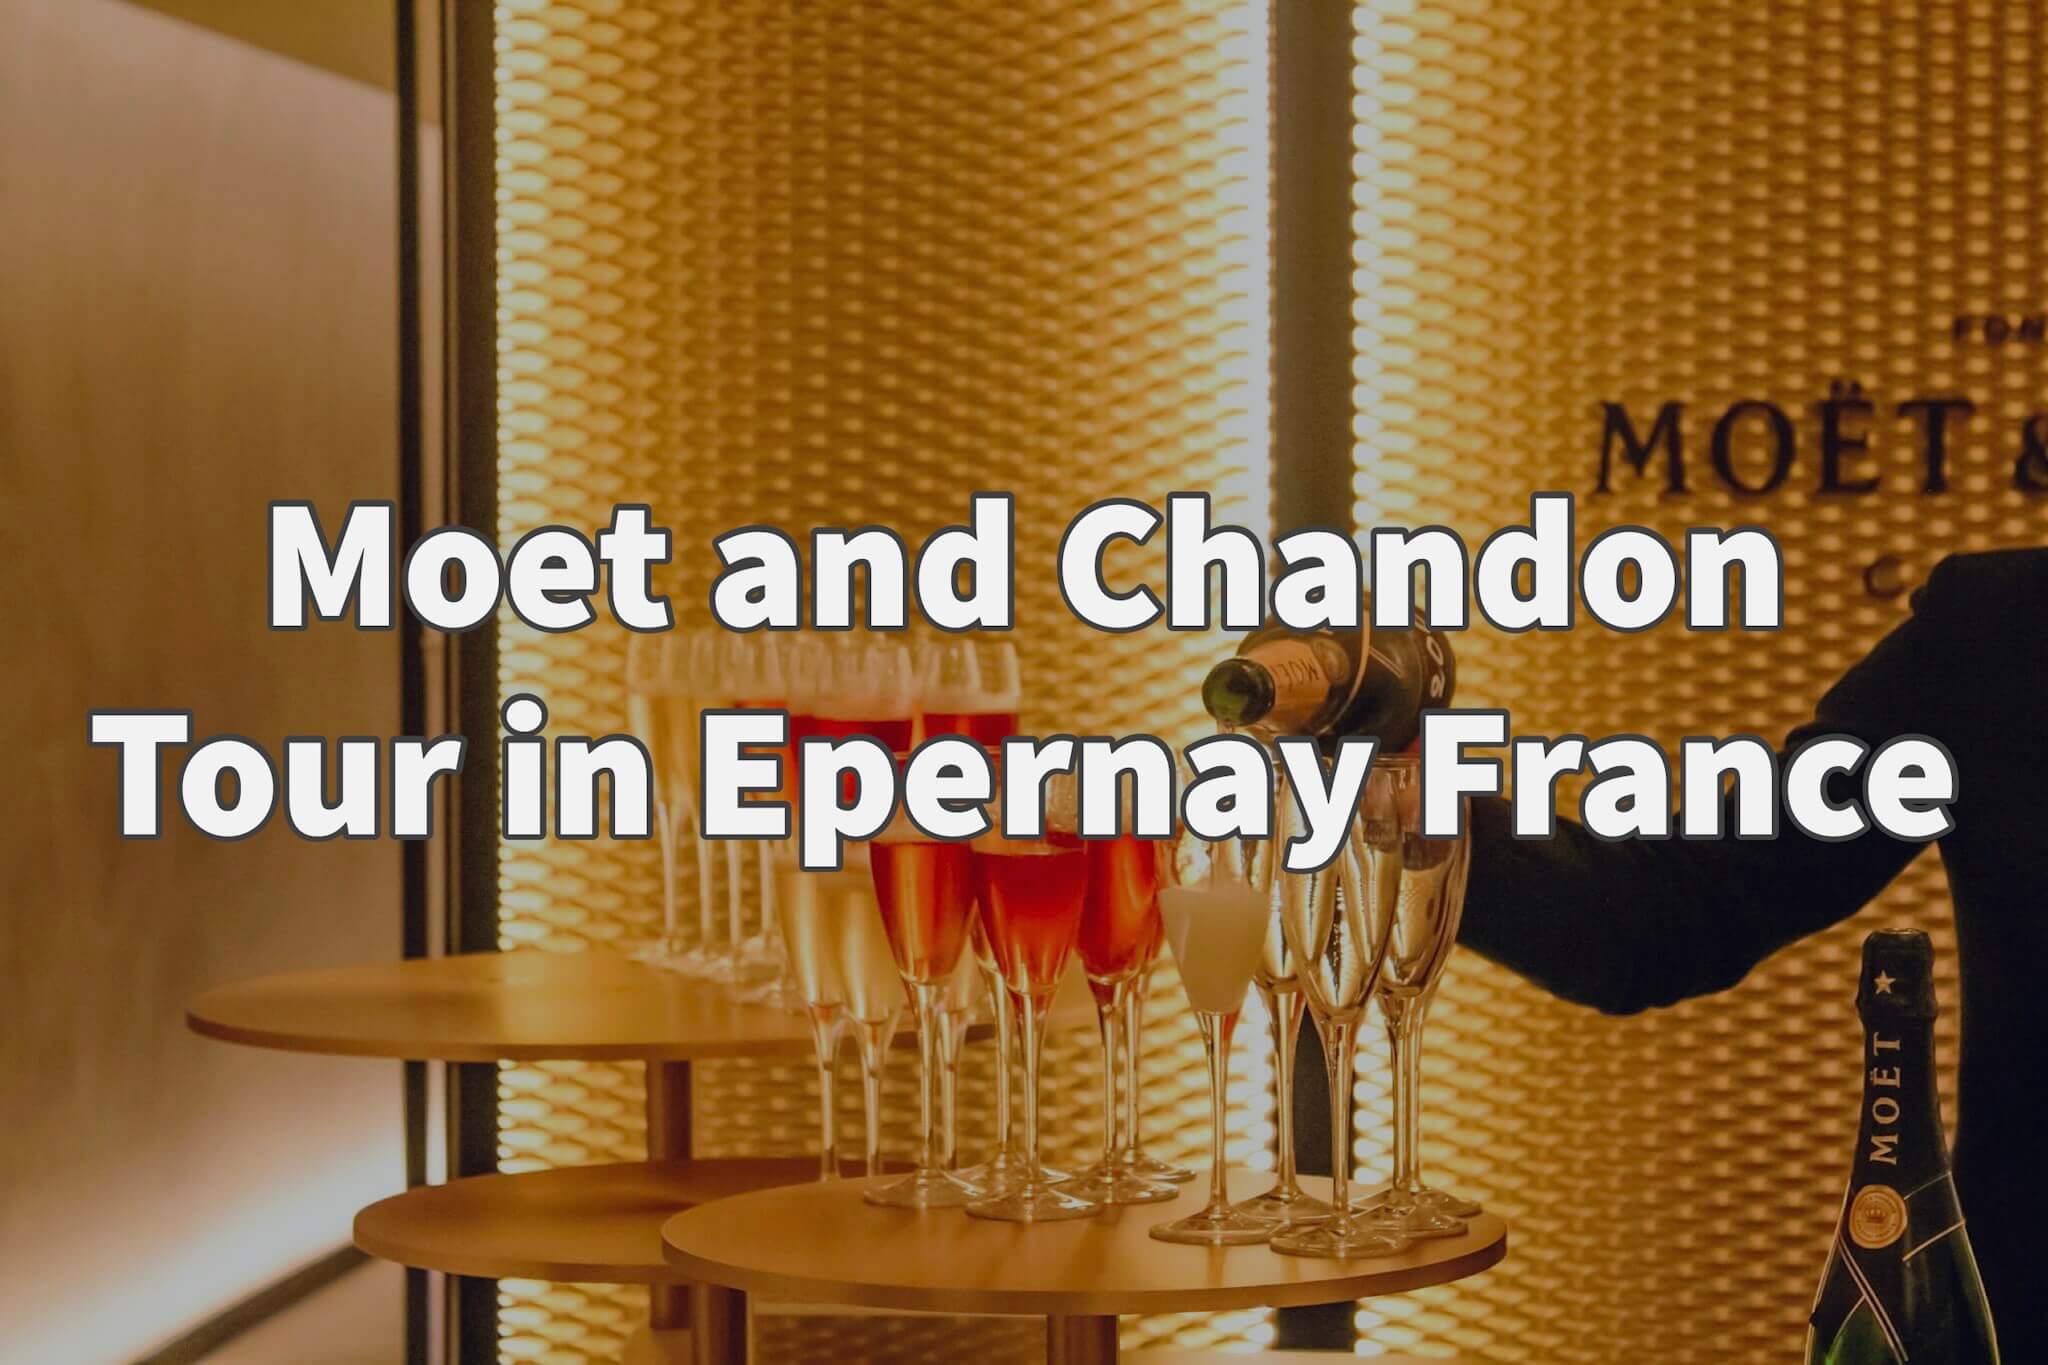 A visit to Moët and Chandon in Épernay France. - Skylar Aria's